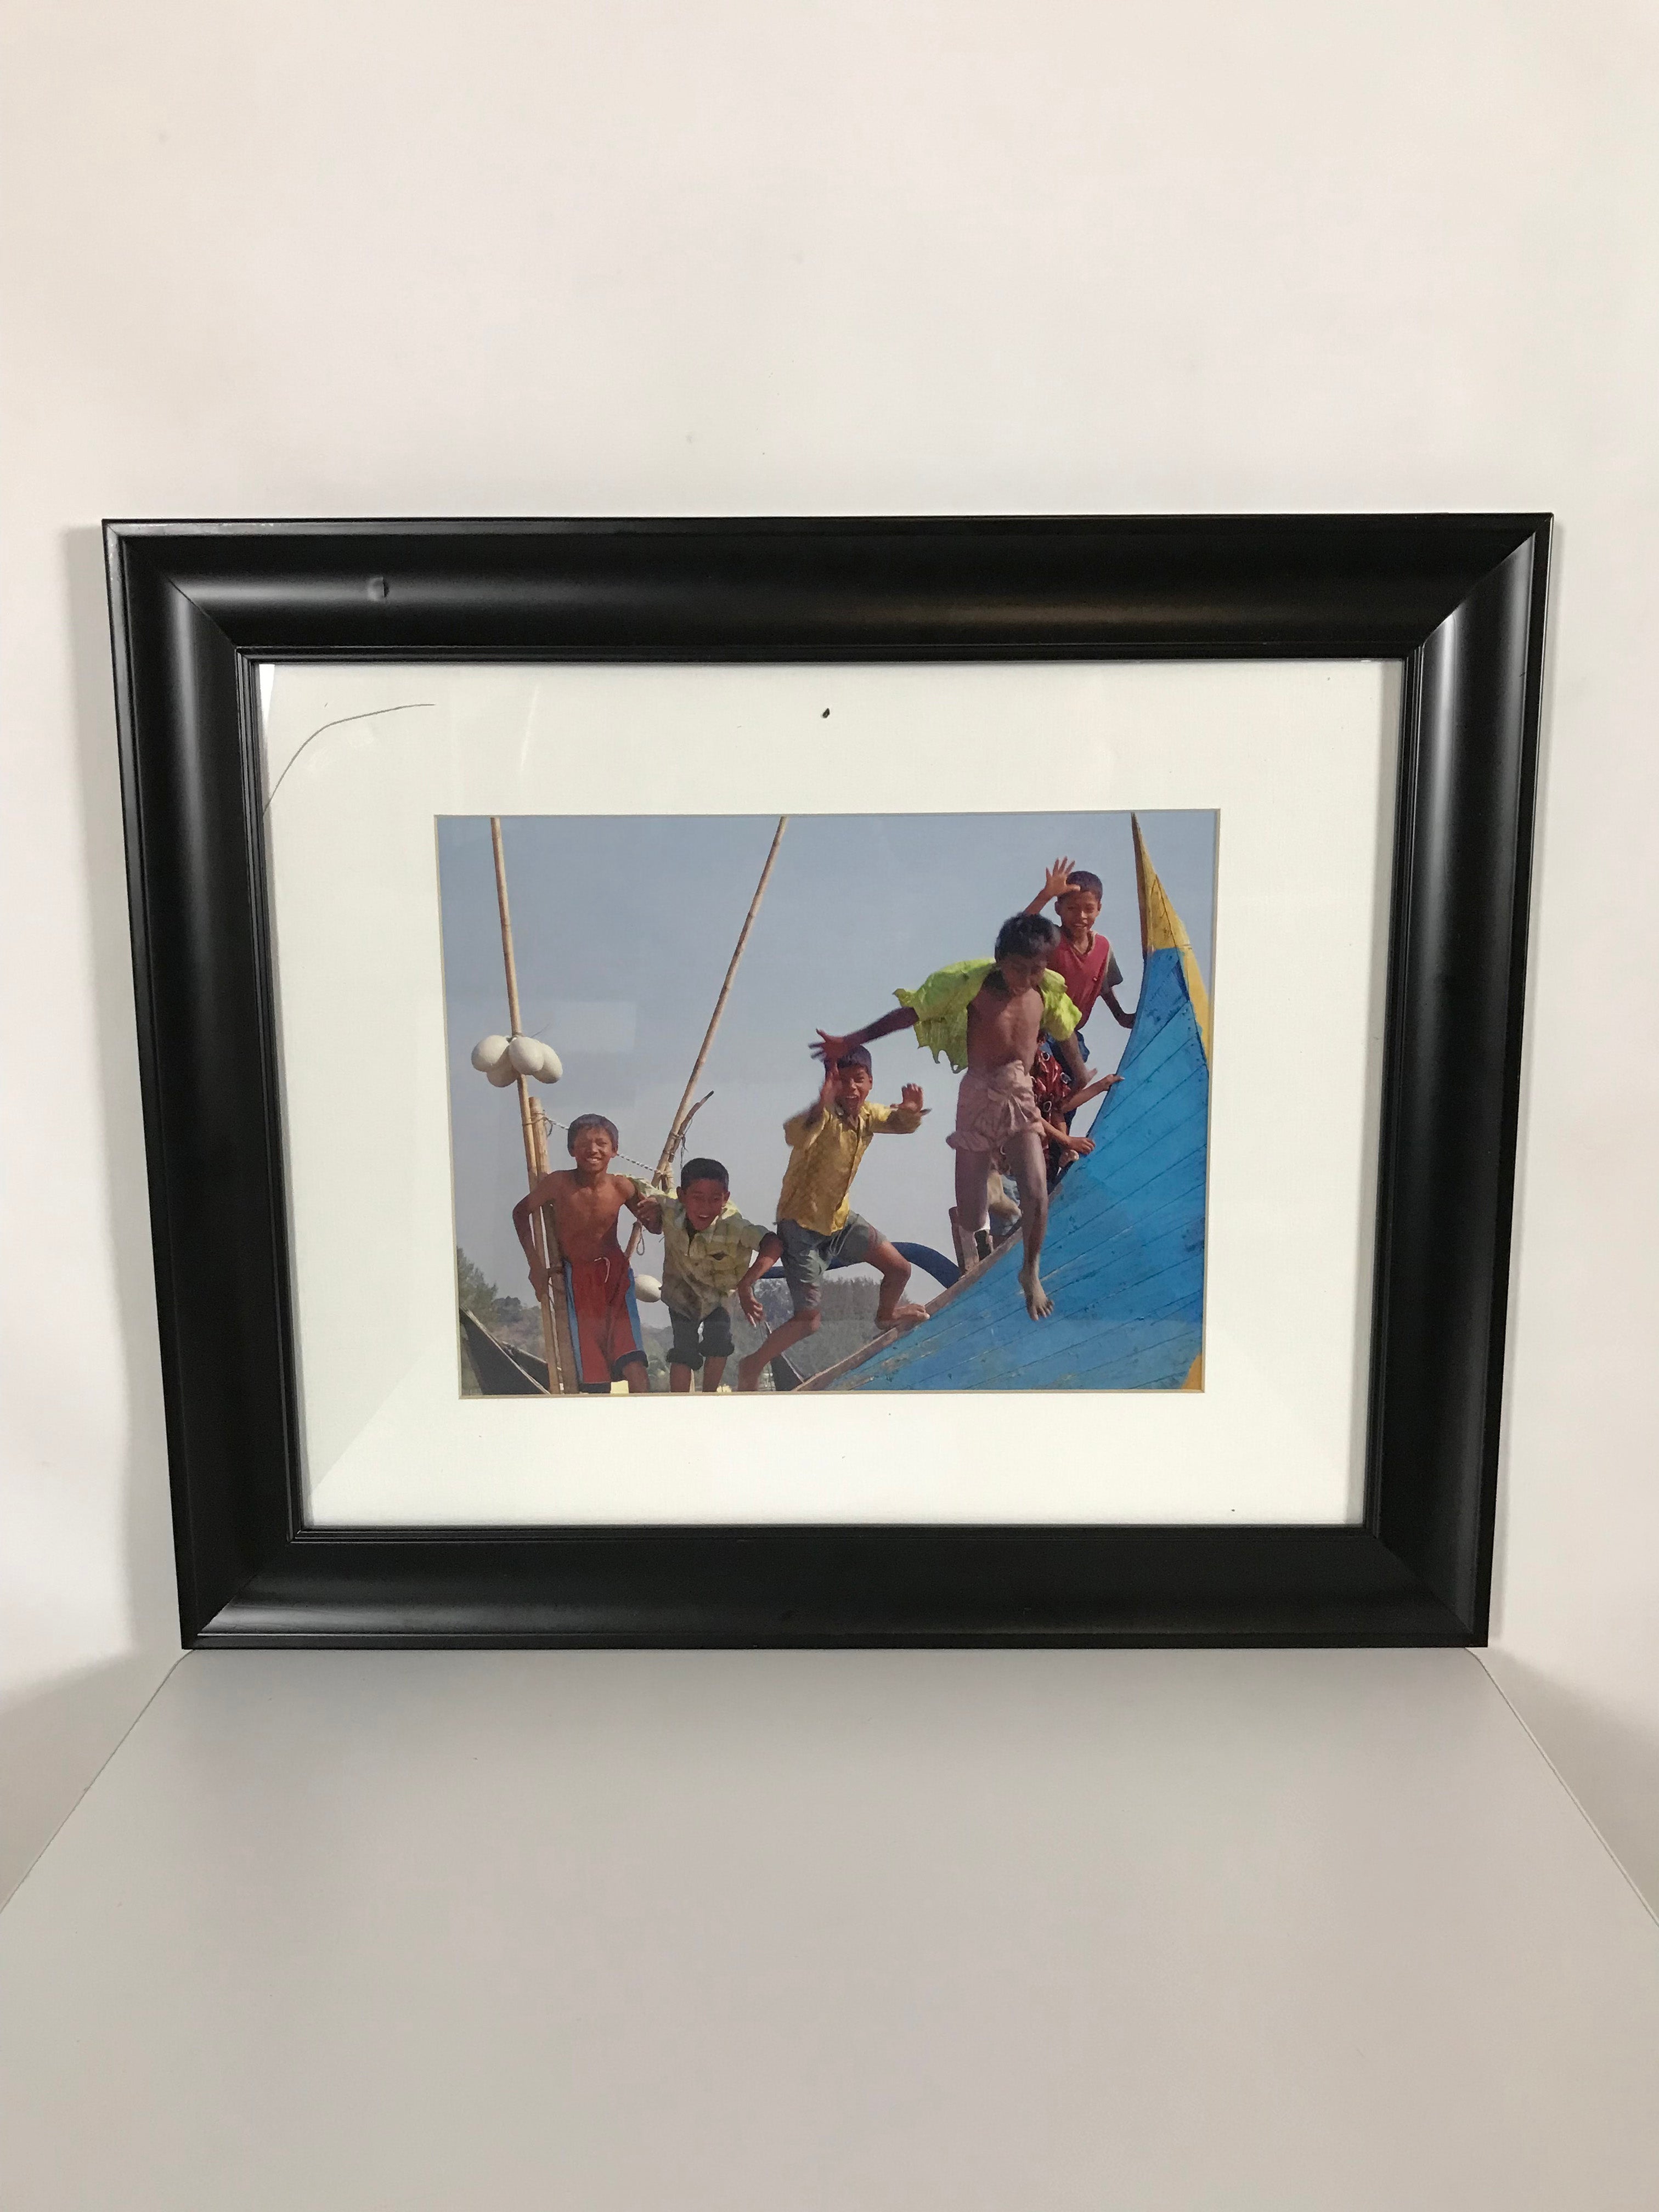 24x20 Framed Picture of Kids Jumping Off Boat in Bangladesh